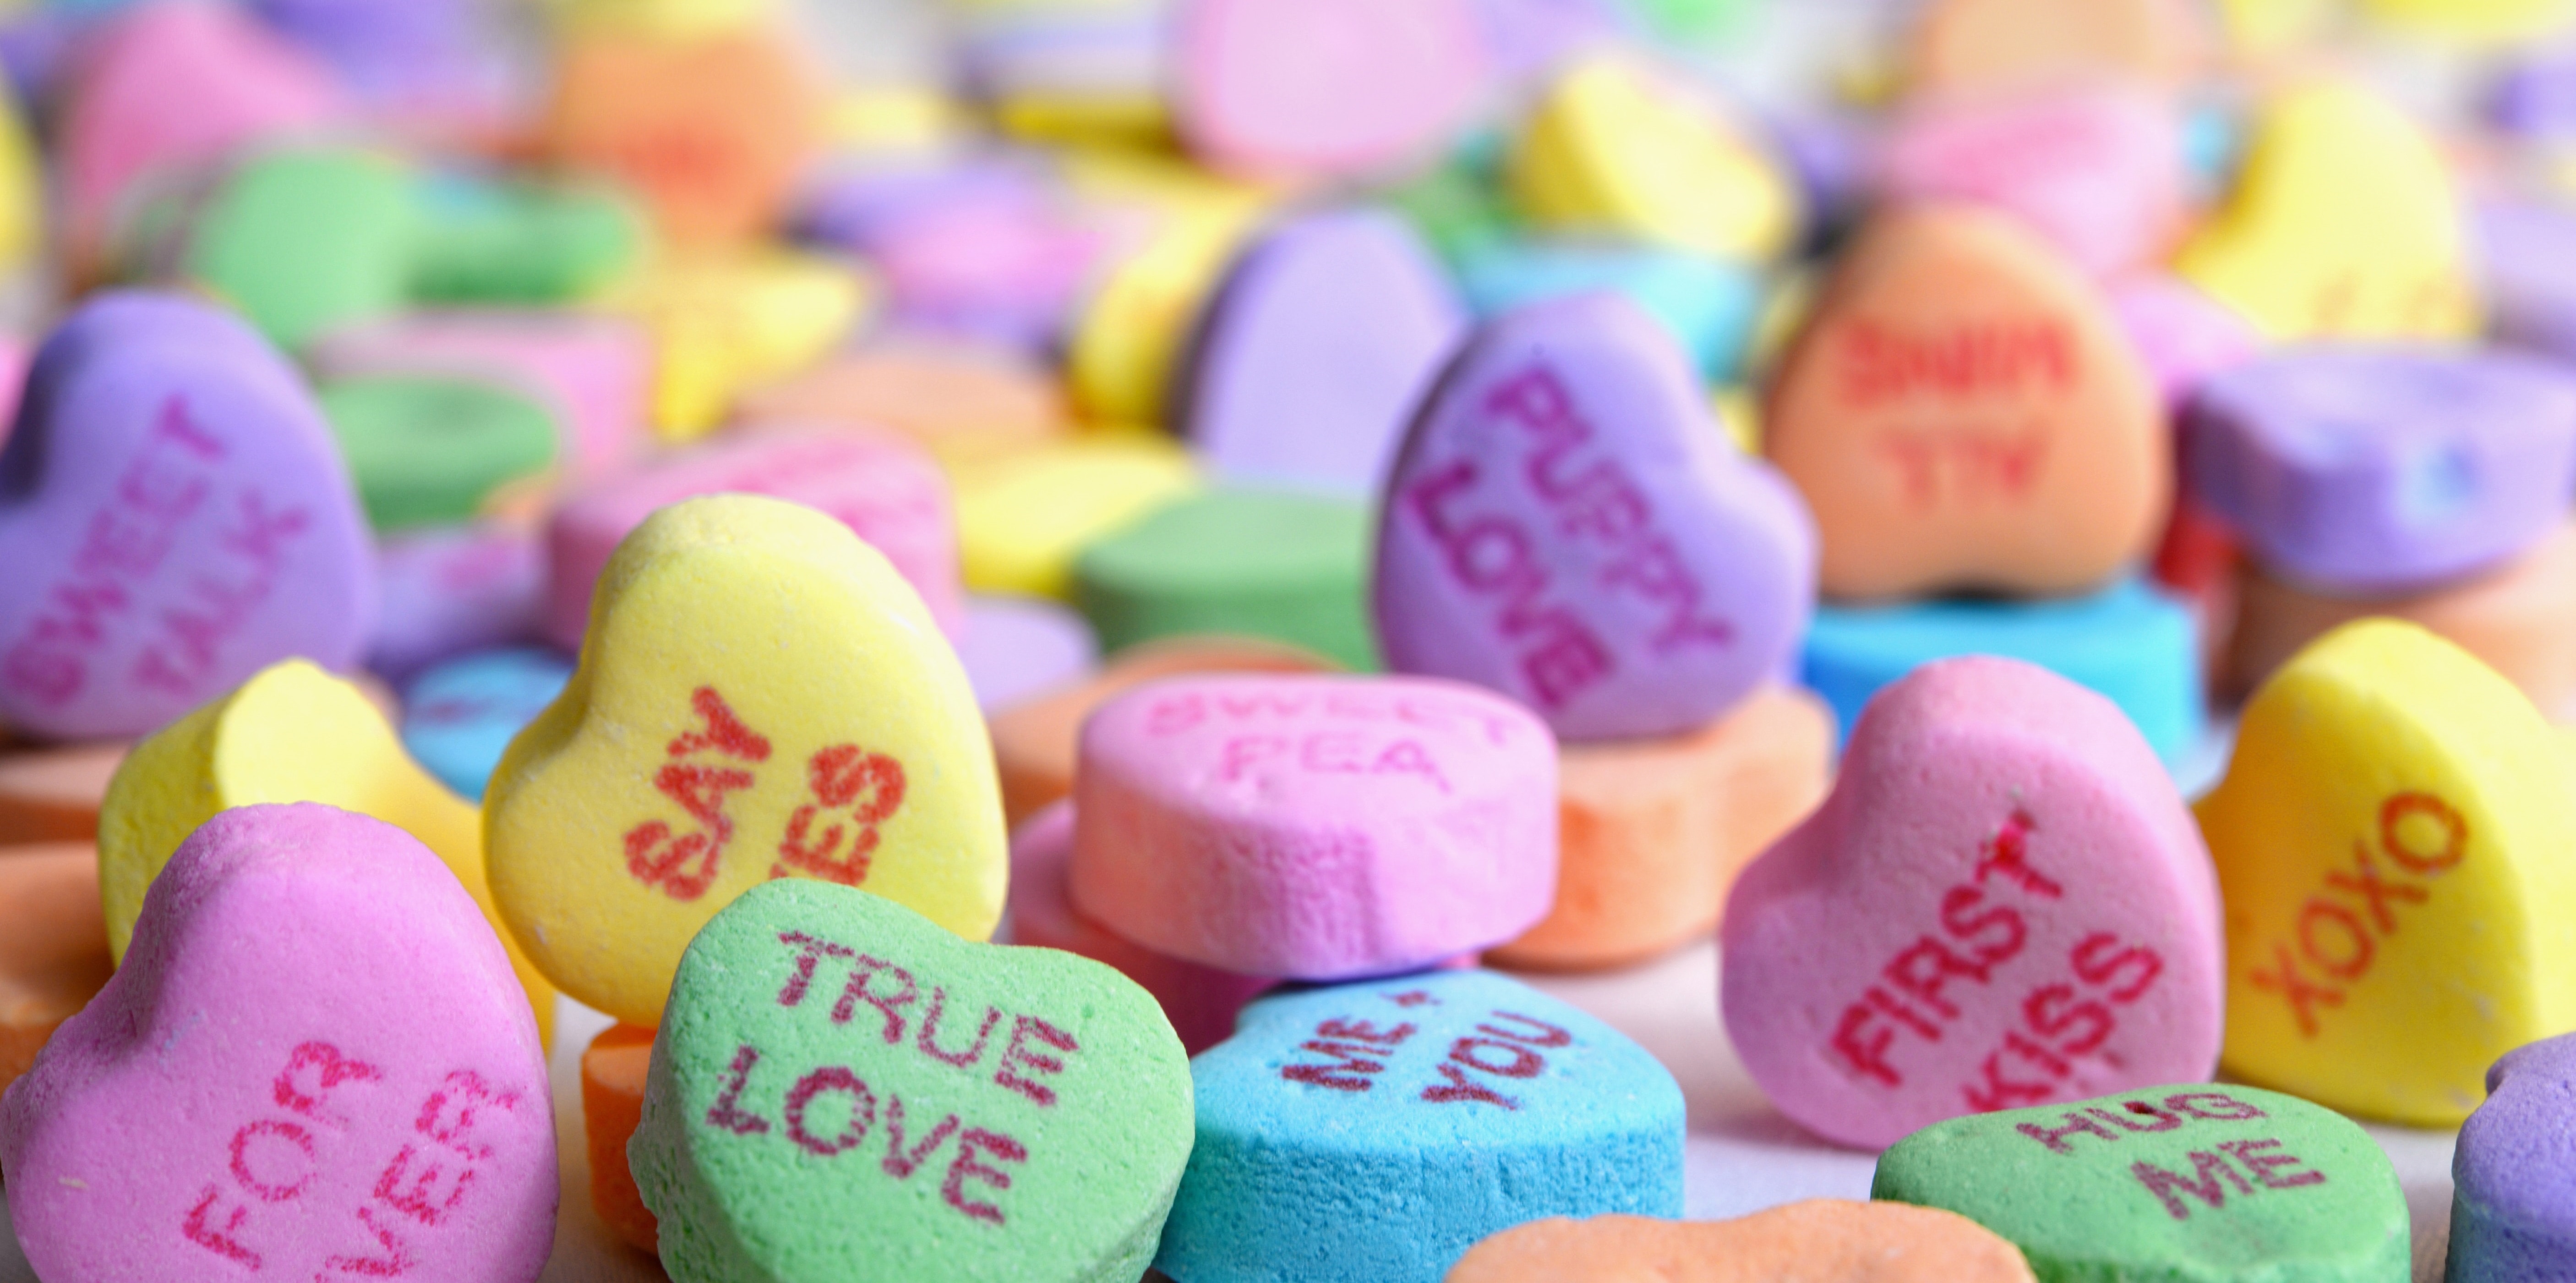 Dating business idea: candy lovers 